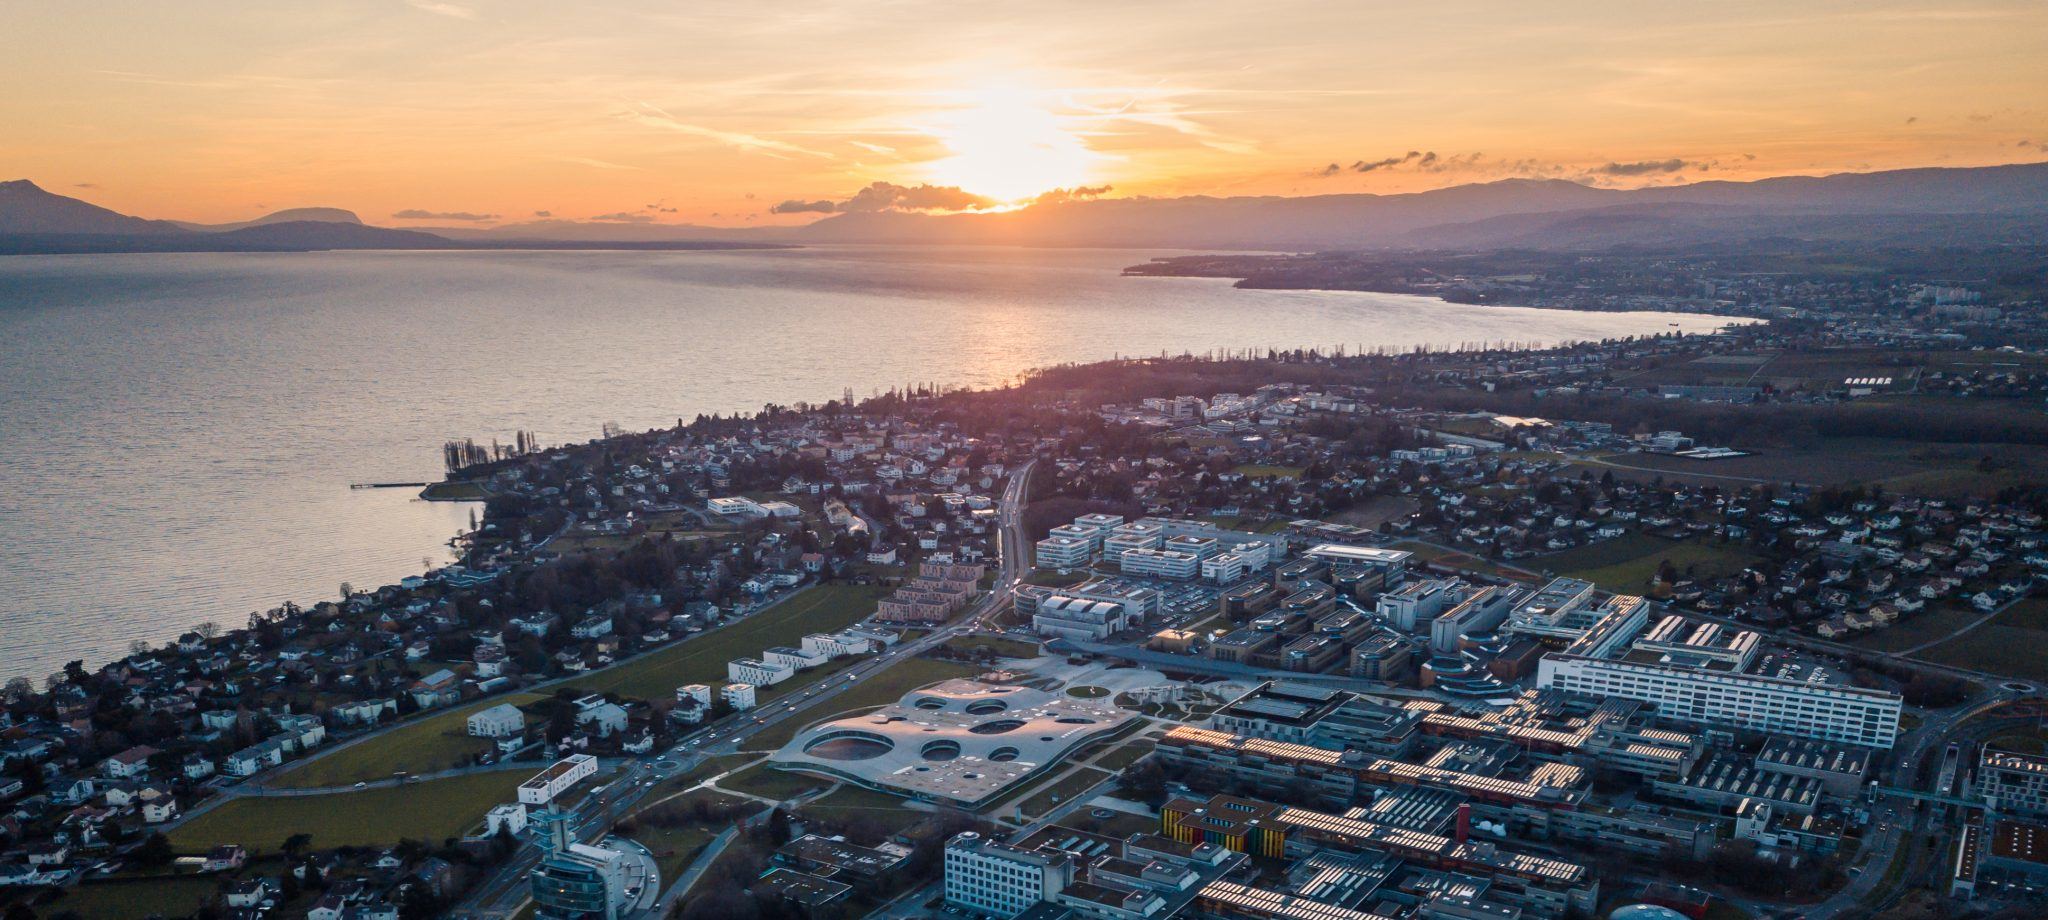 EPFL aerial view by Jamani Caillet